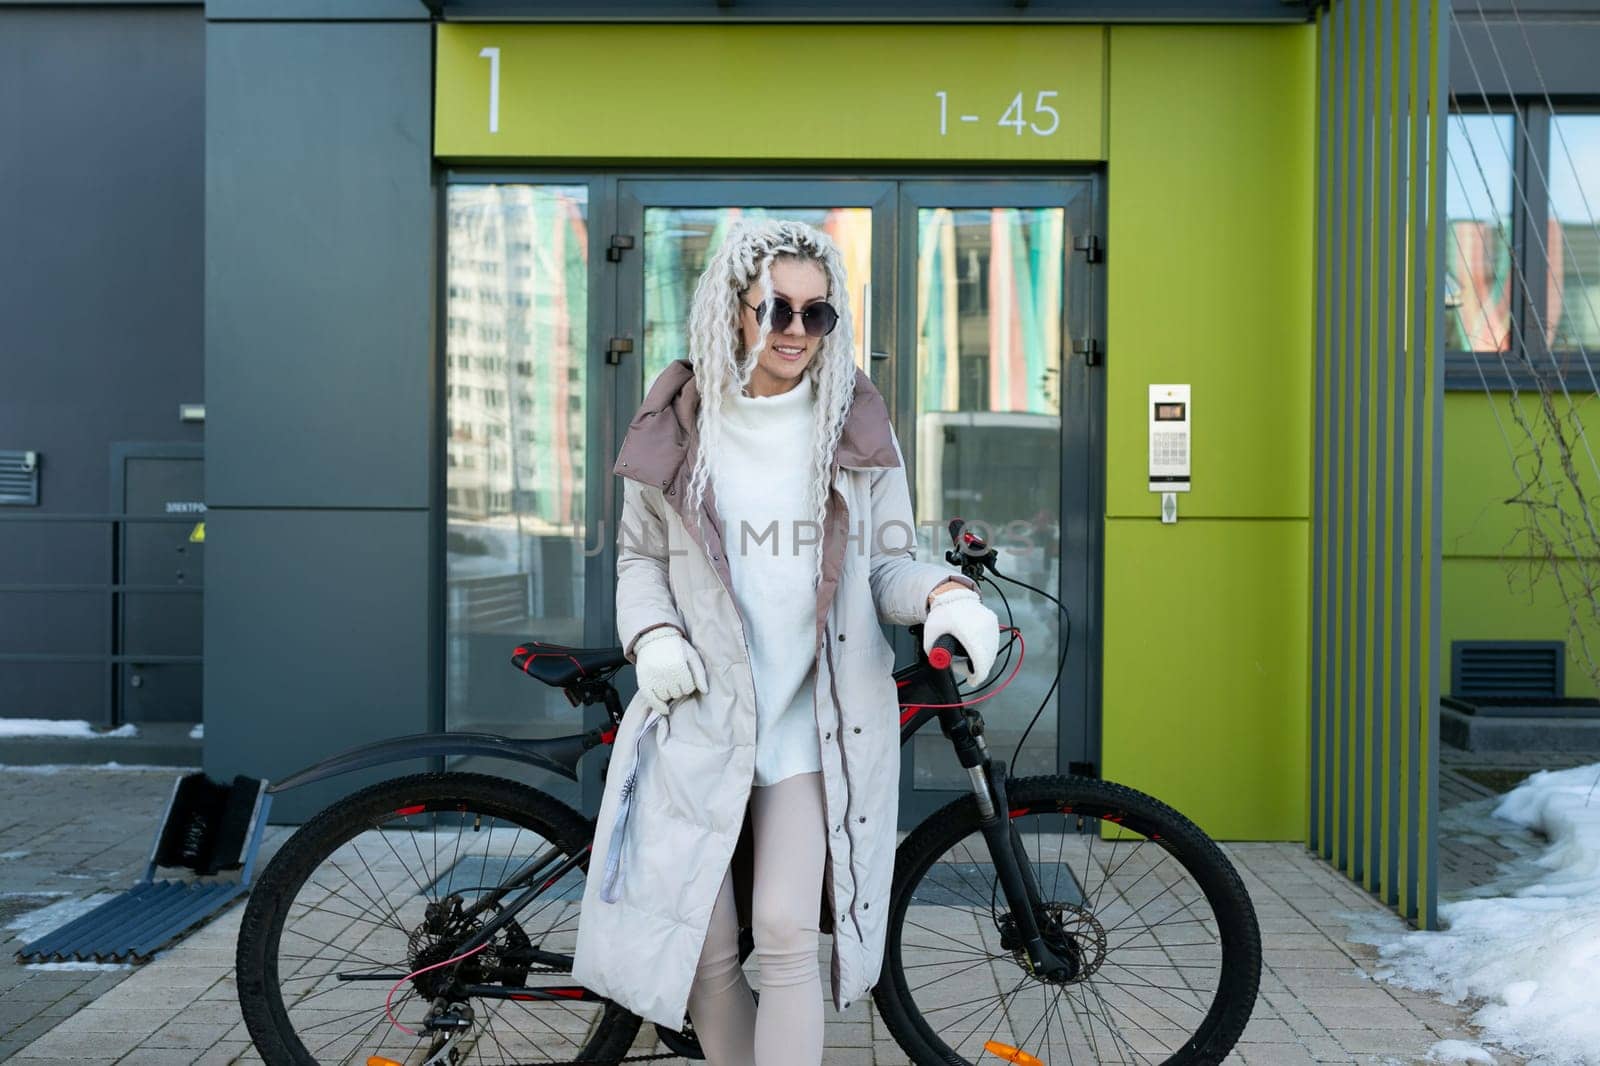 A woman is standing next to a bike parked in front of a tall building. She appears to be taking a break or checking her surroundings. The scene captures urban life and transportation in a city setting.